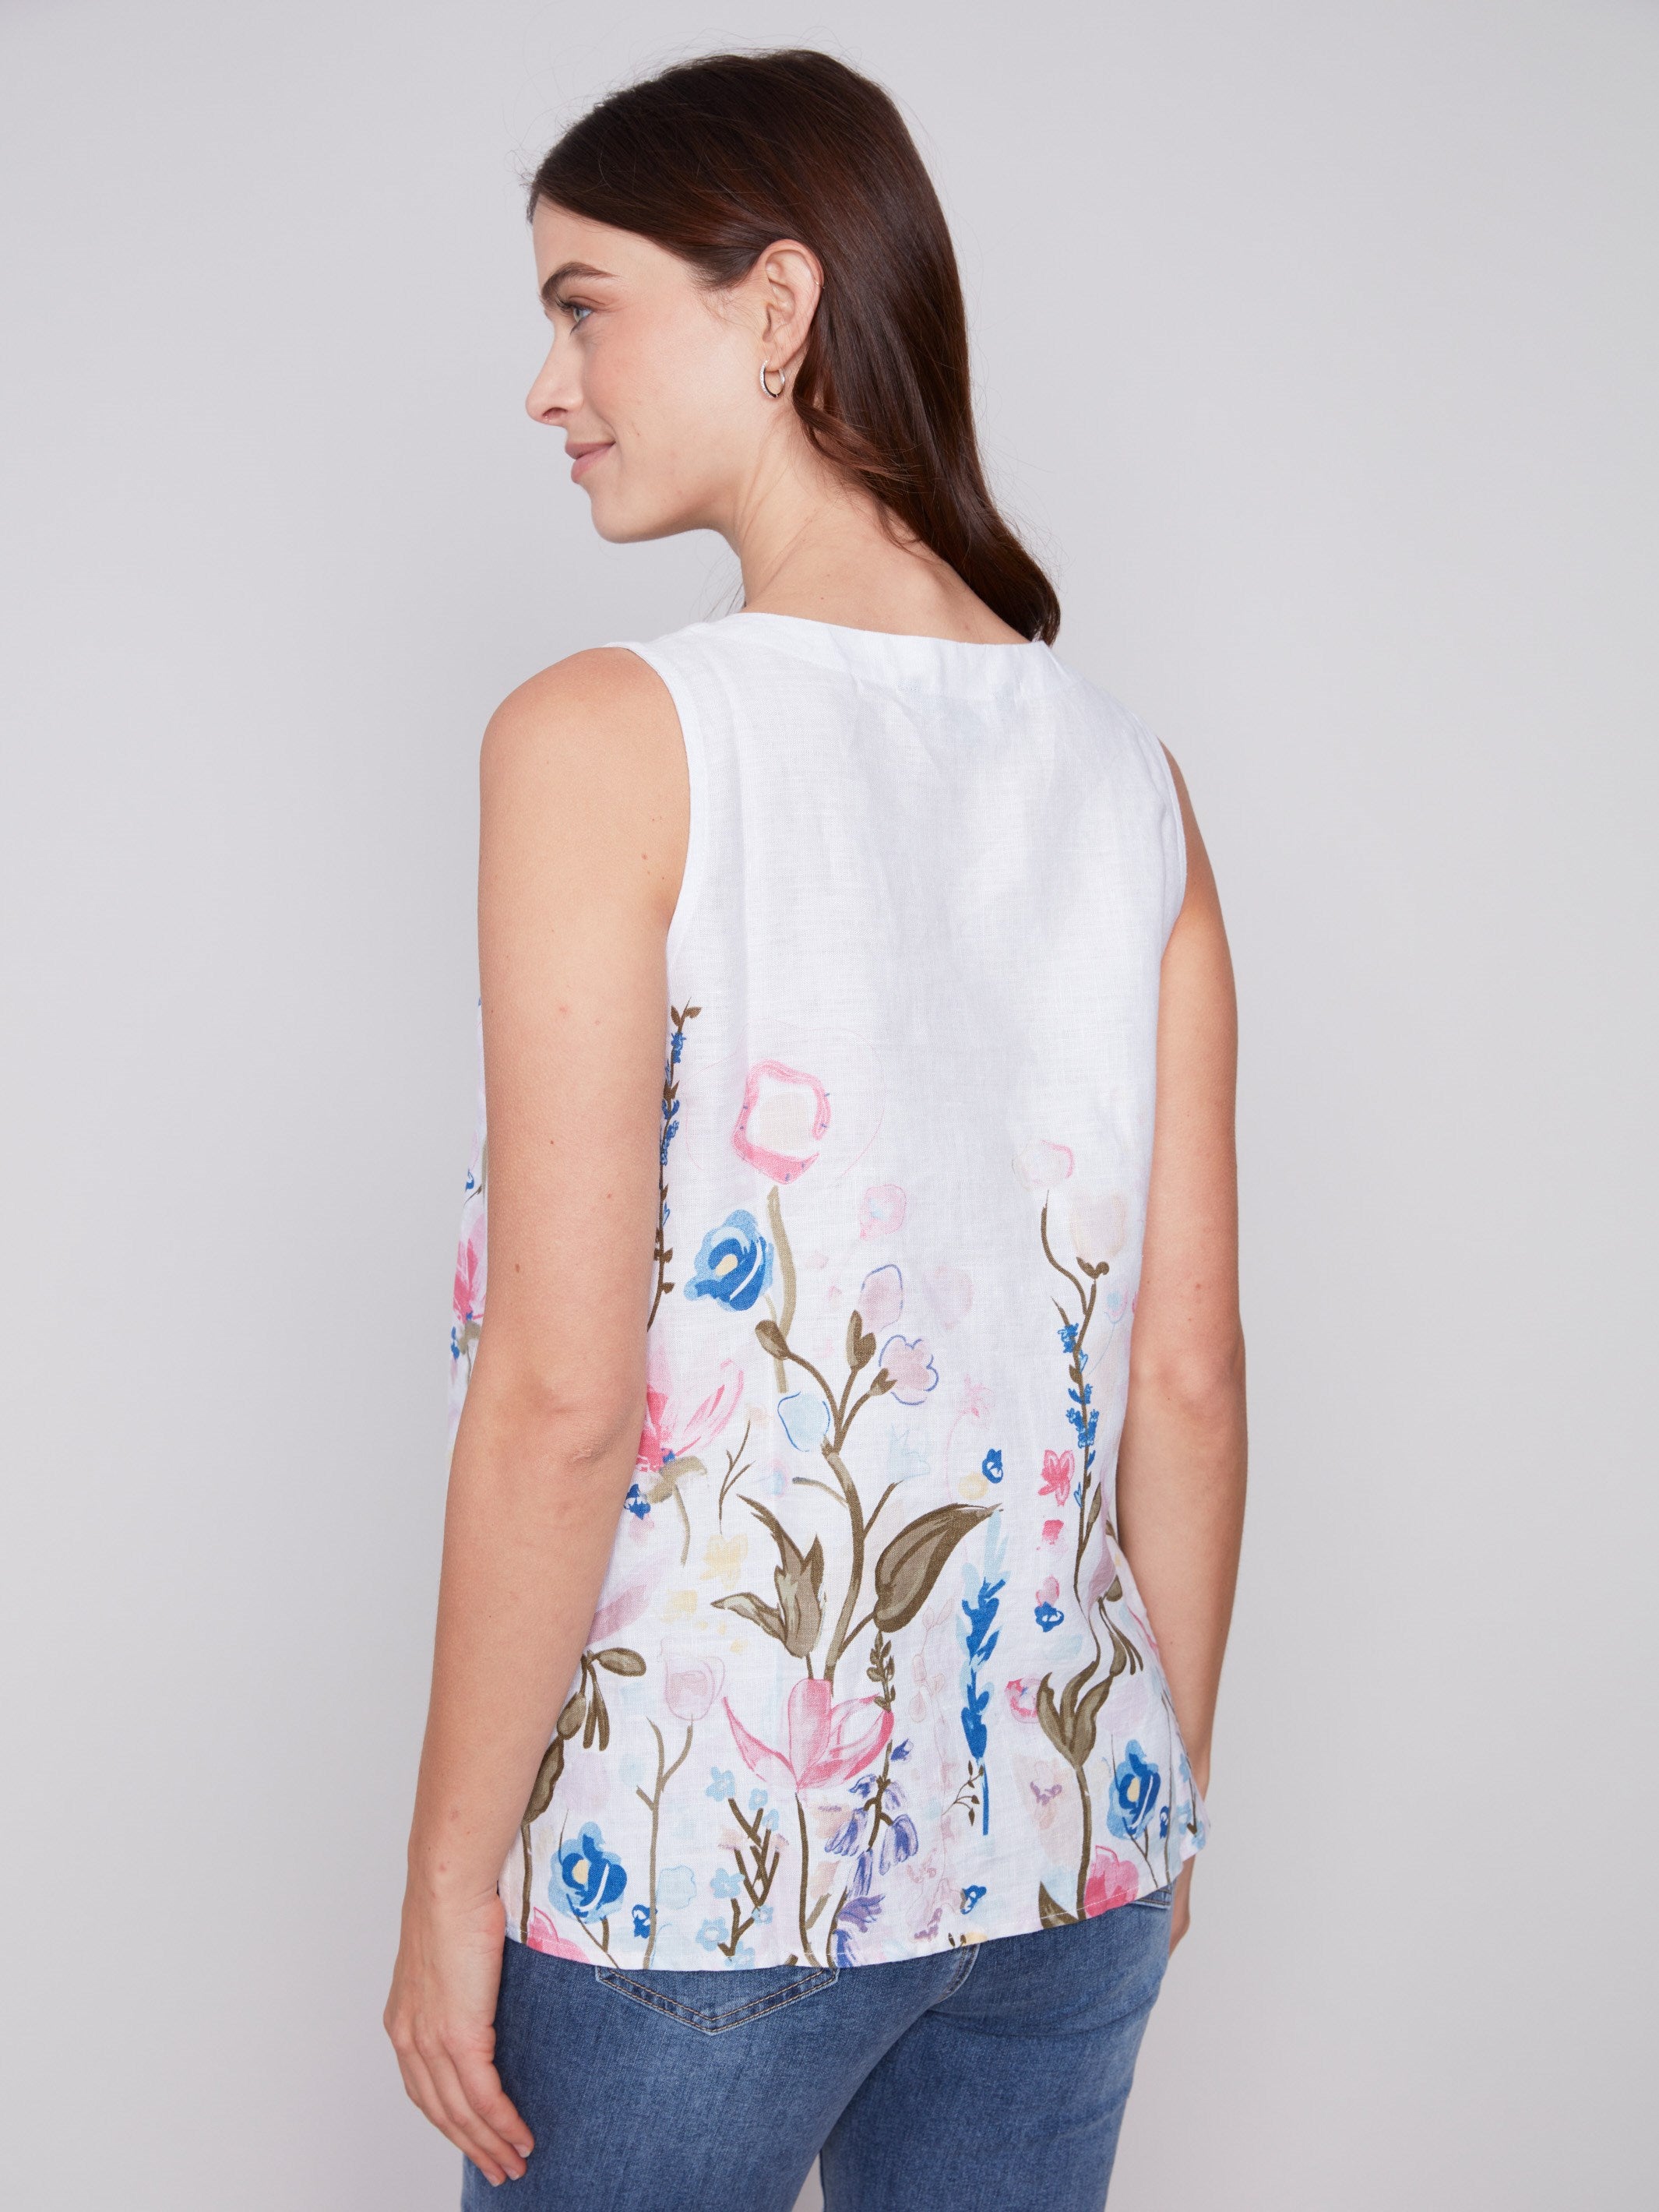 Sleeveless Floral Printed Linen Top - Pastel - Charlie B Collection Canada - Image 2